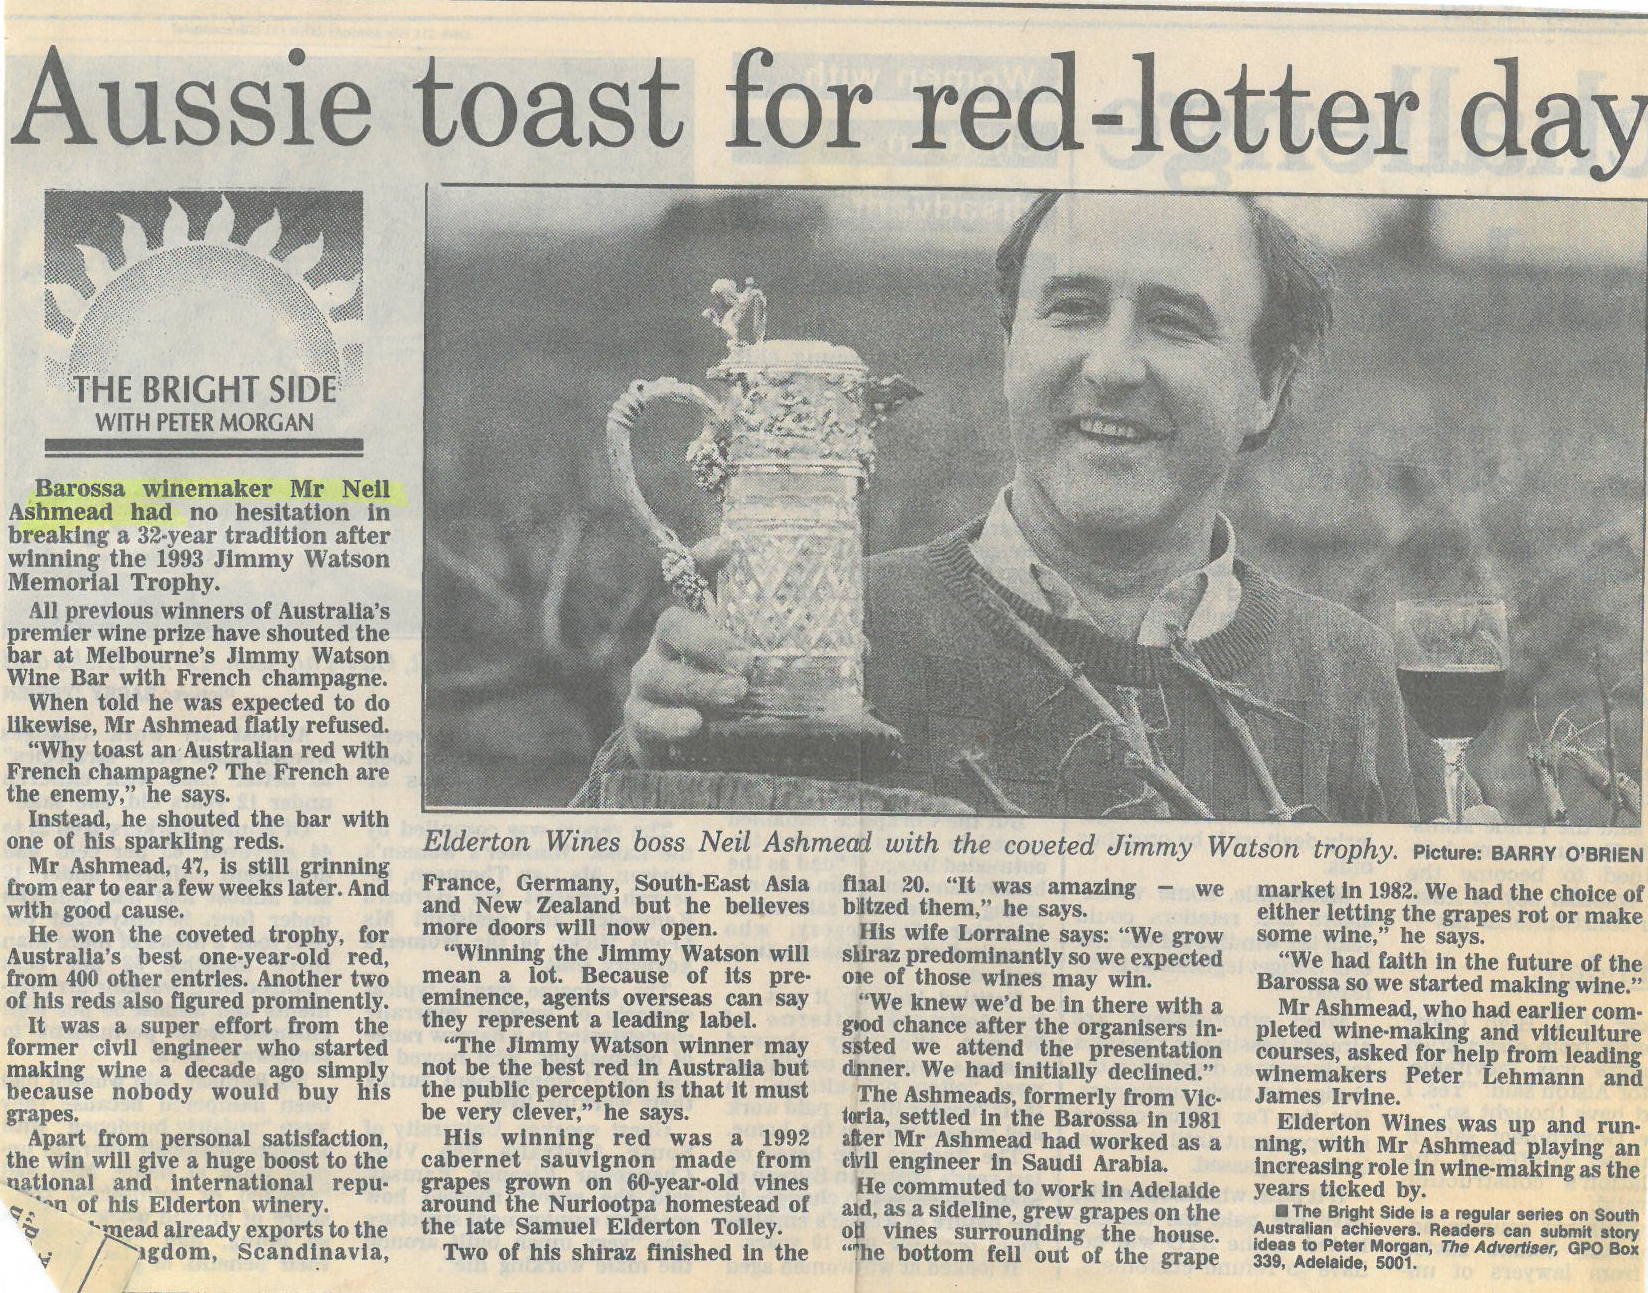 Article in The Advertiser 15SEPT93 re Jimmy Watson win